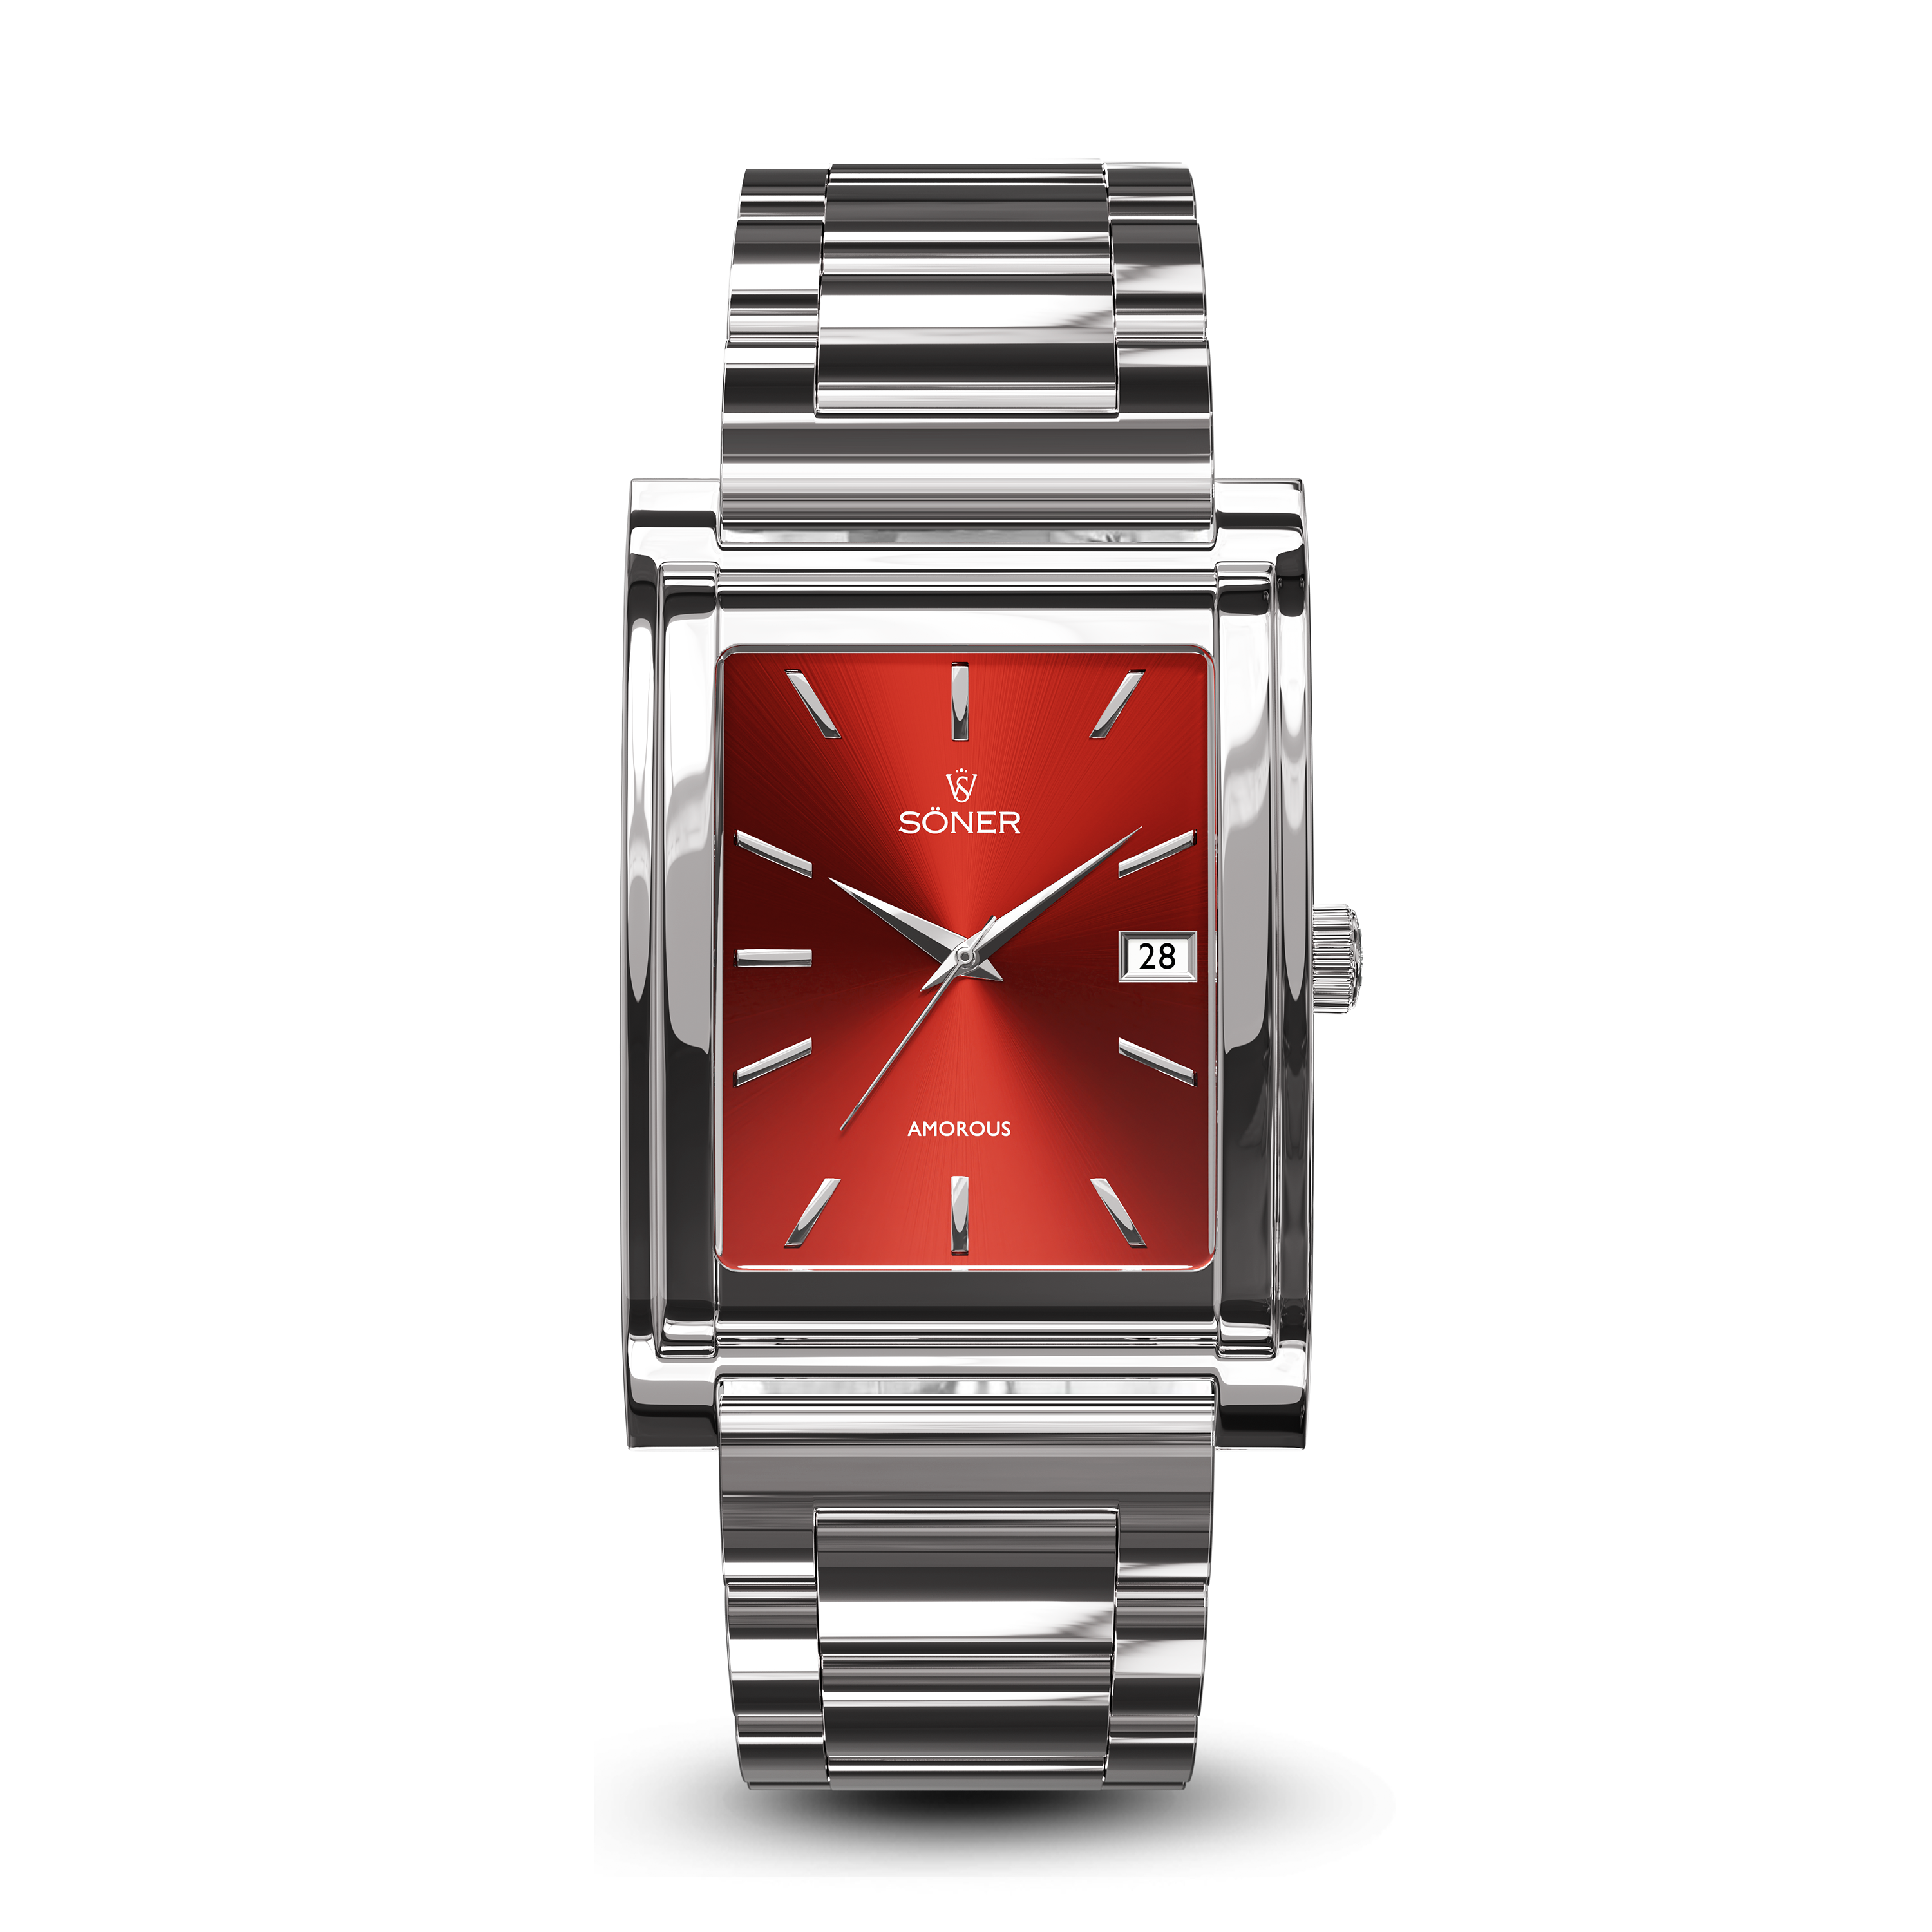 Square automatic watch, Amorous Rio with red dial - steel bracelet front view